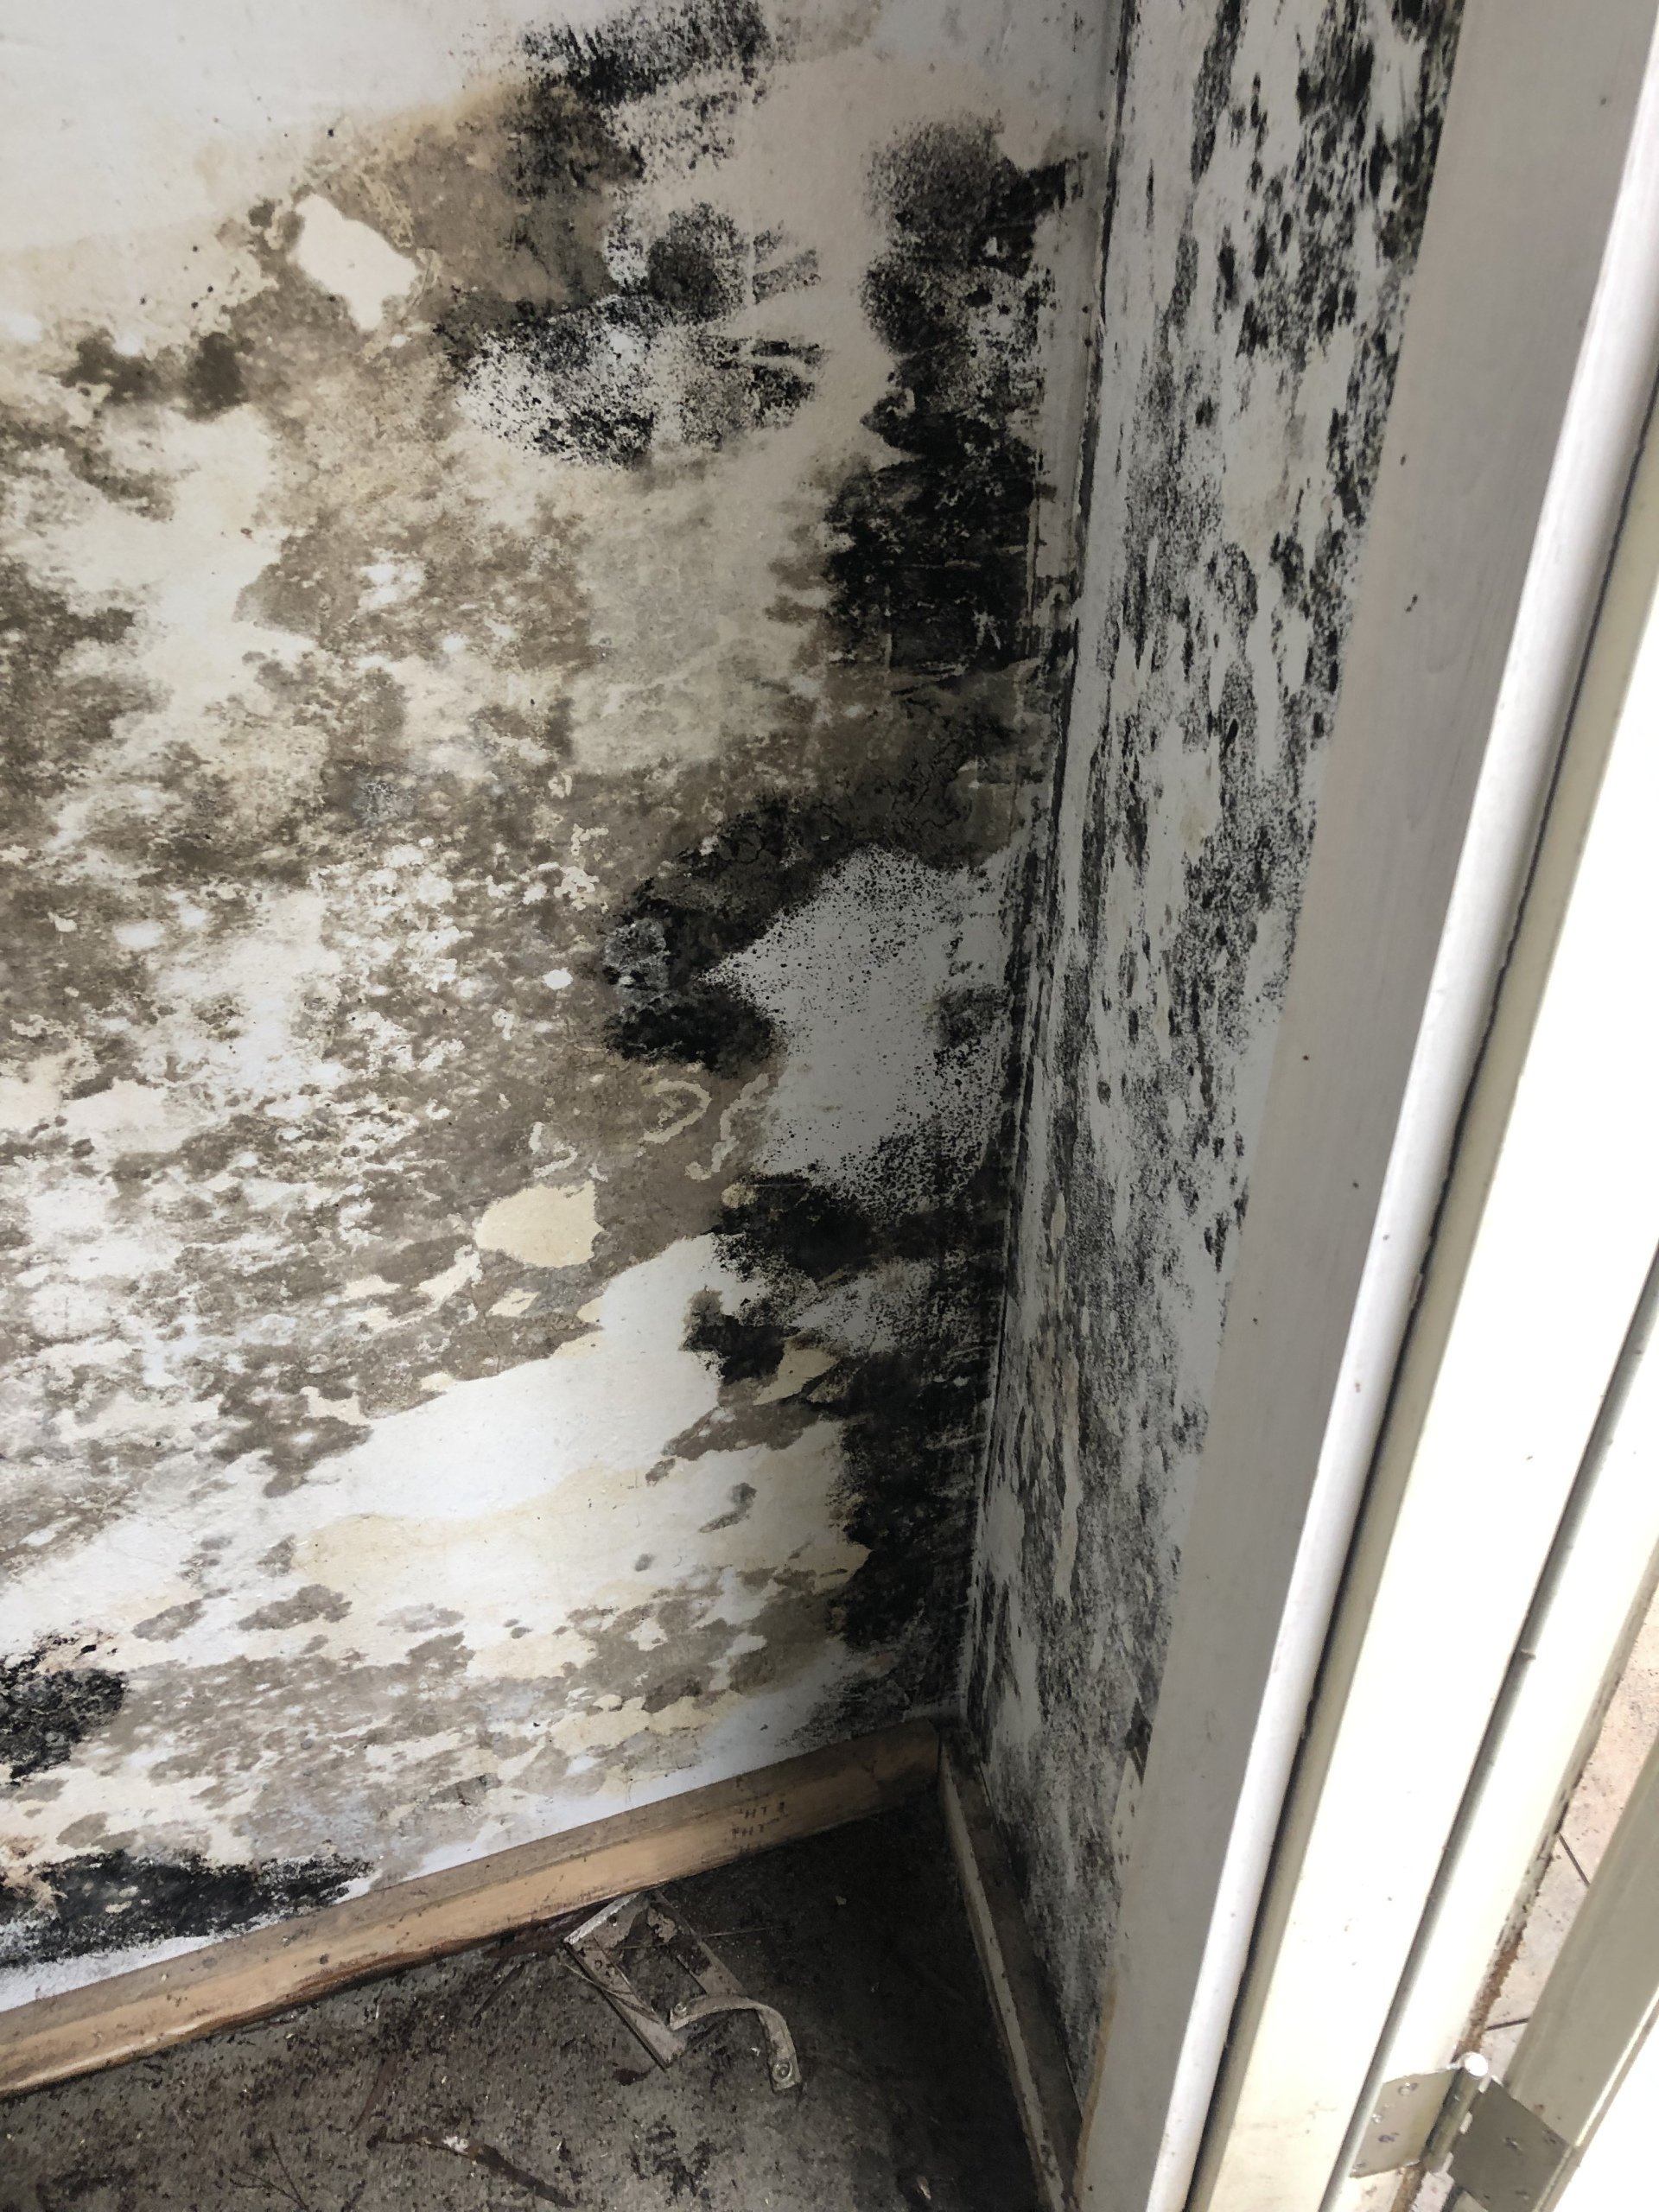 How to get rid of black mold on wood?